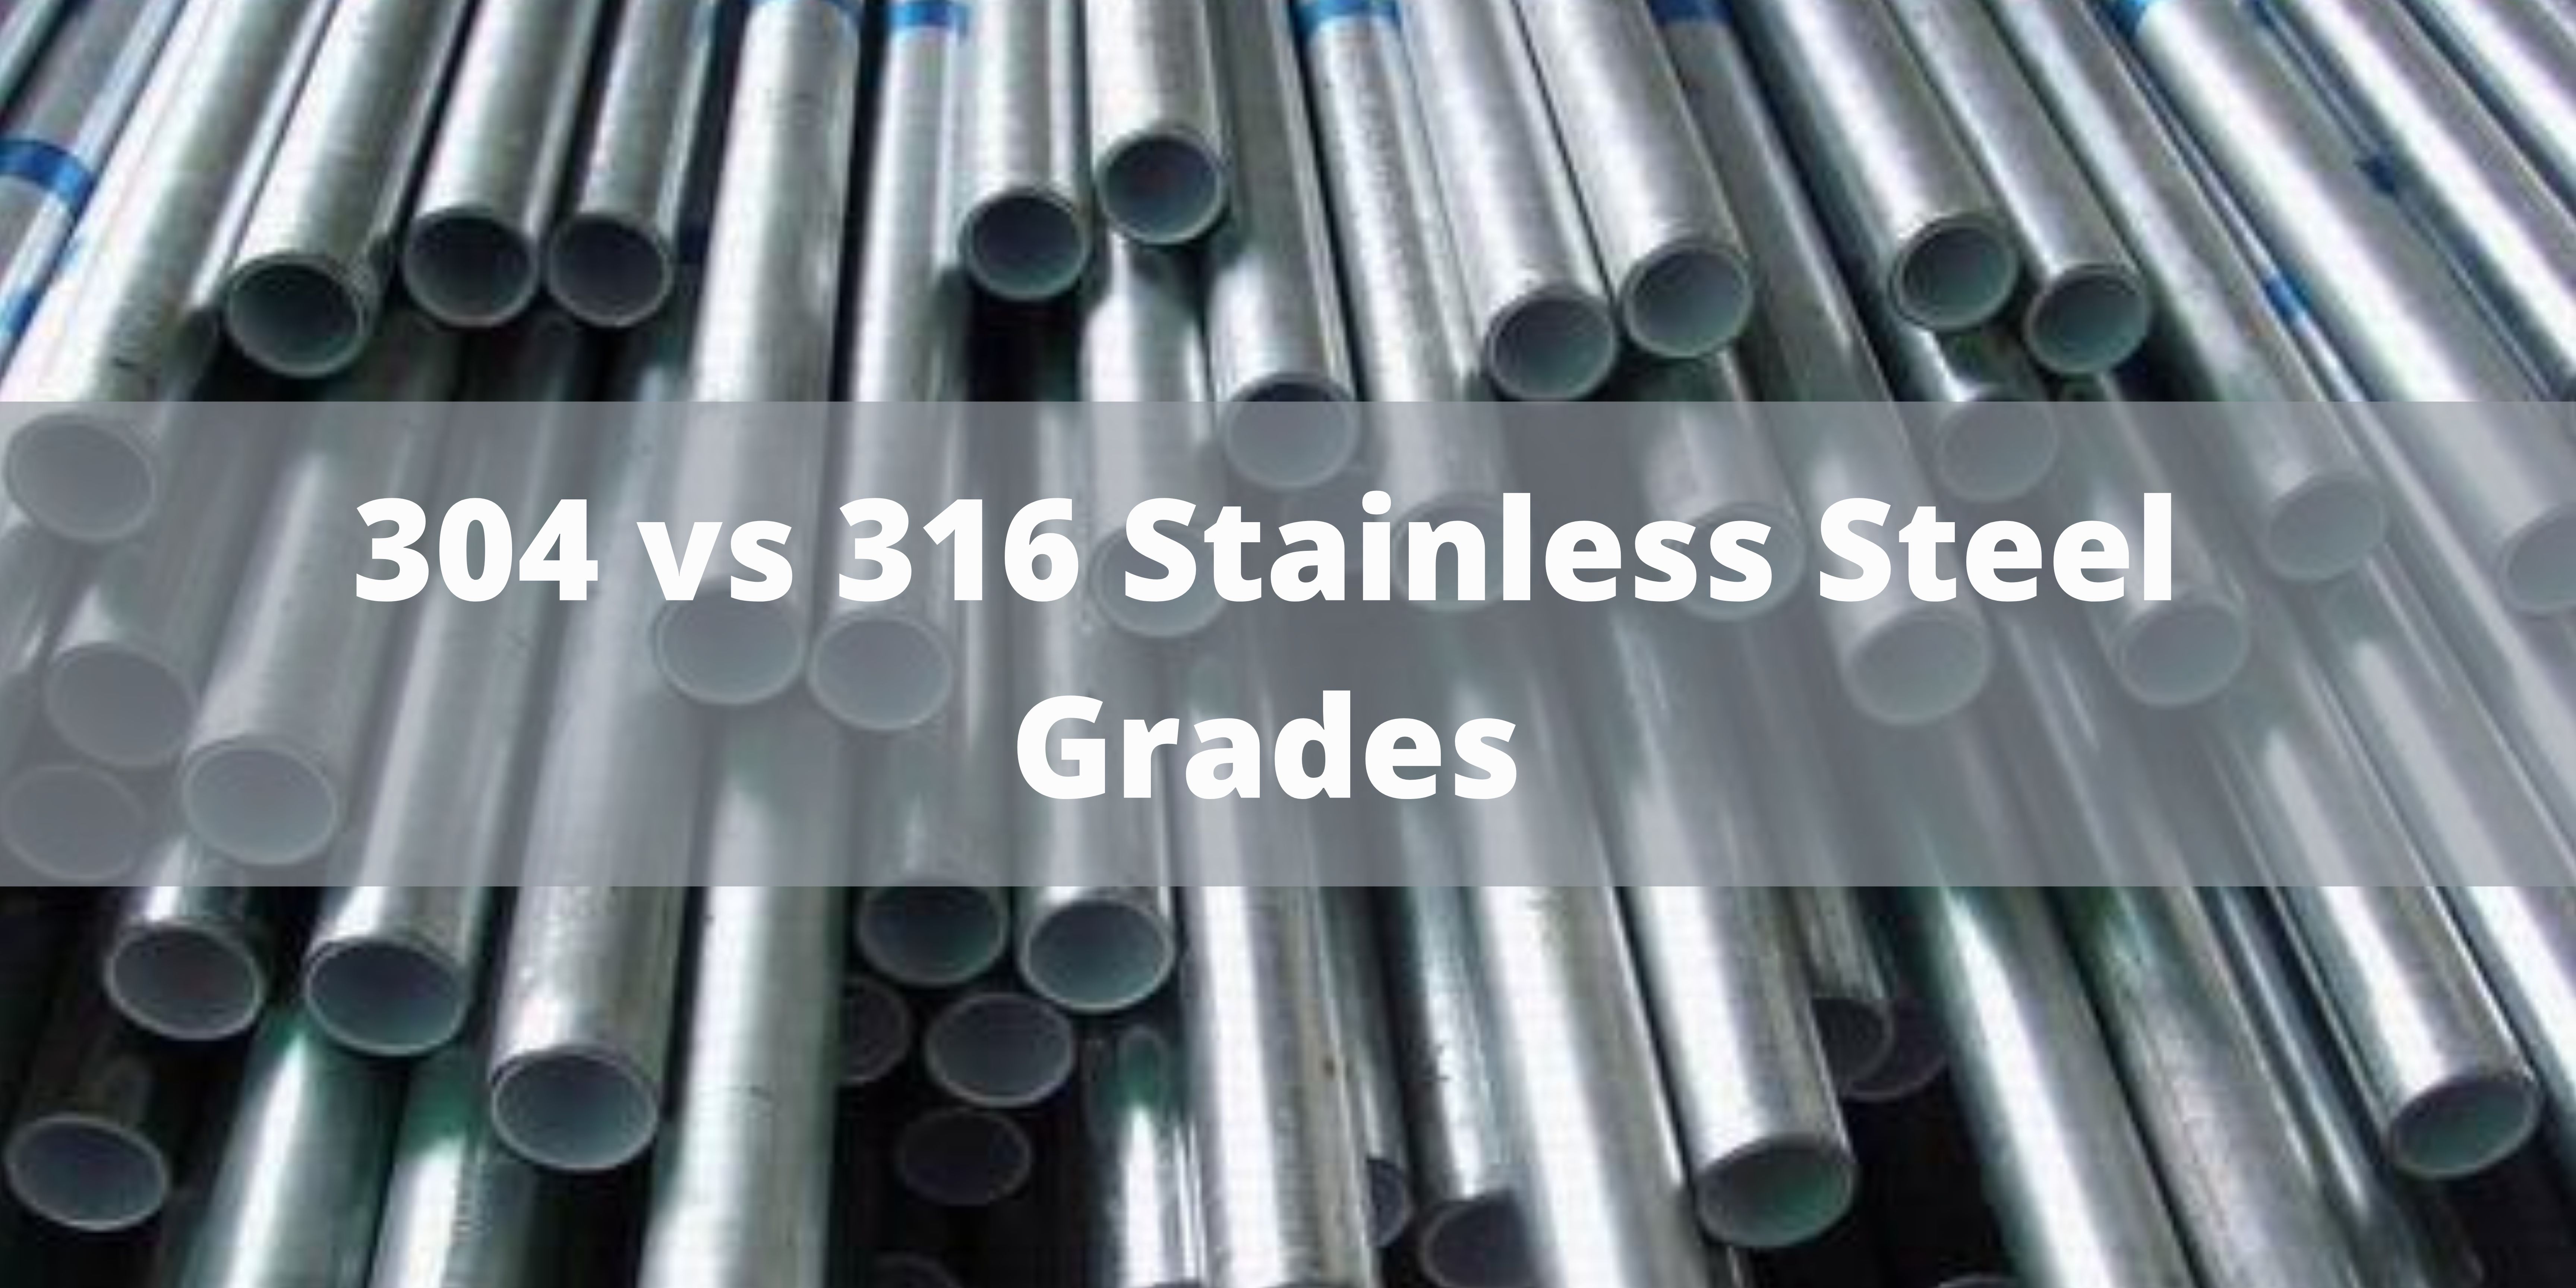 304 vs 316 Stainless Steel Grades - The Difference